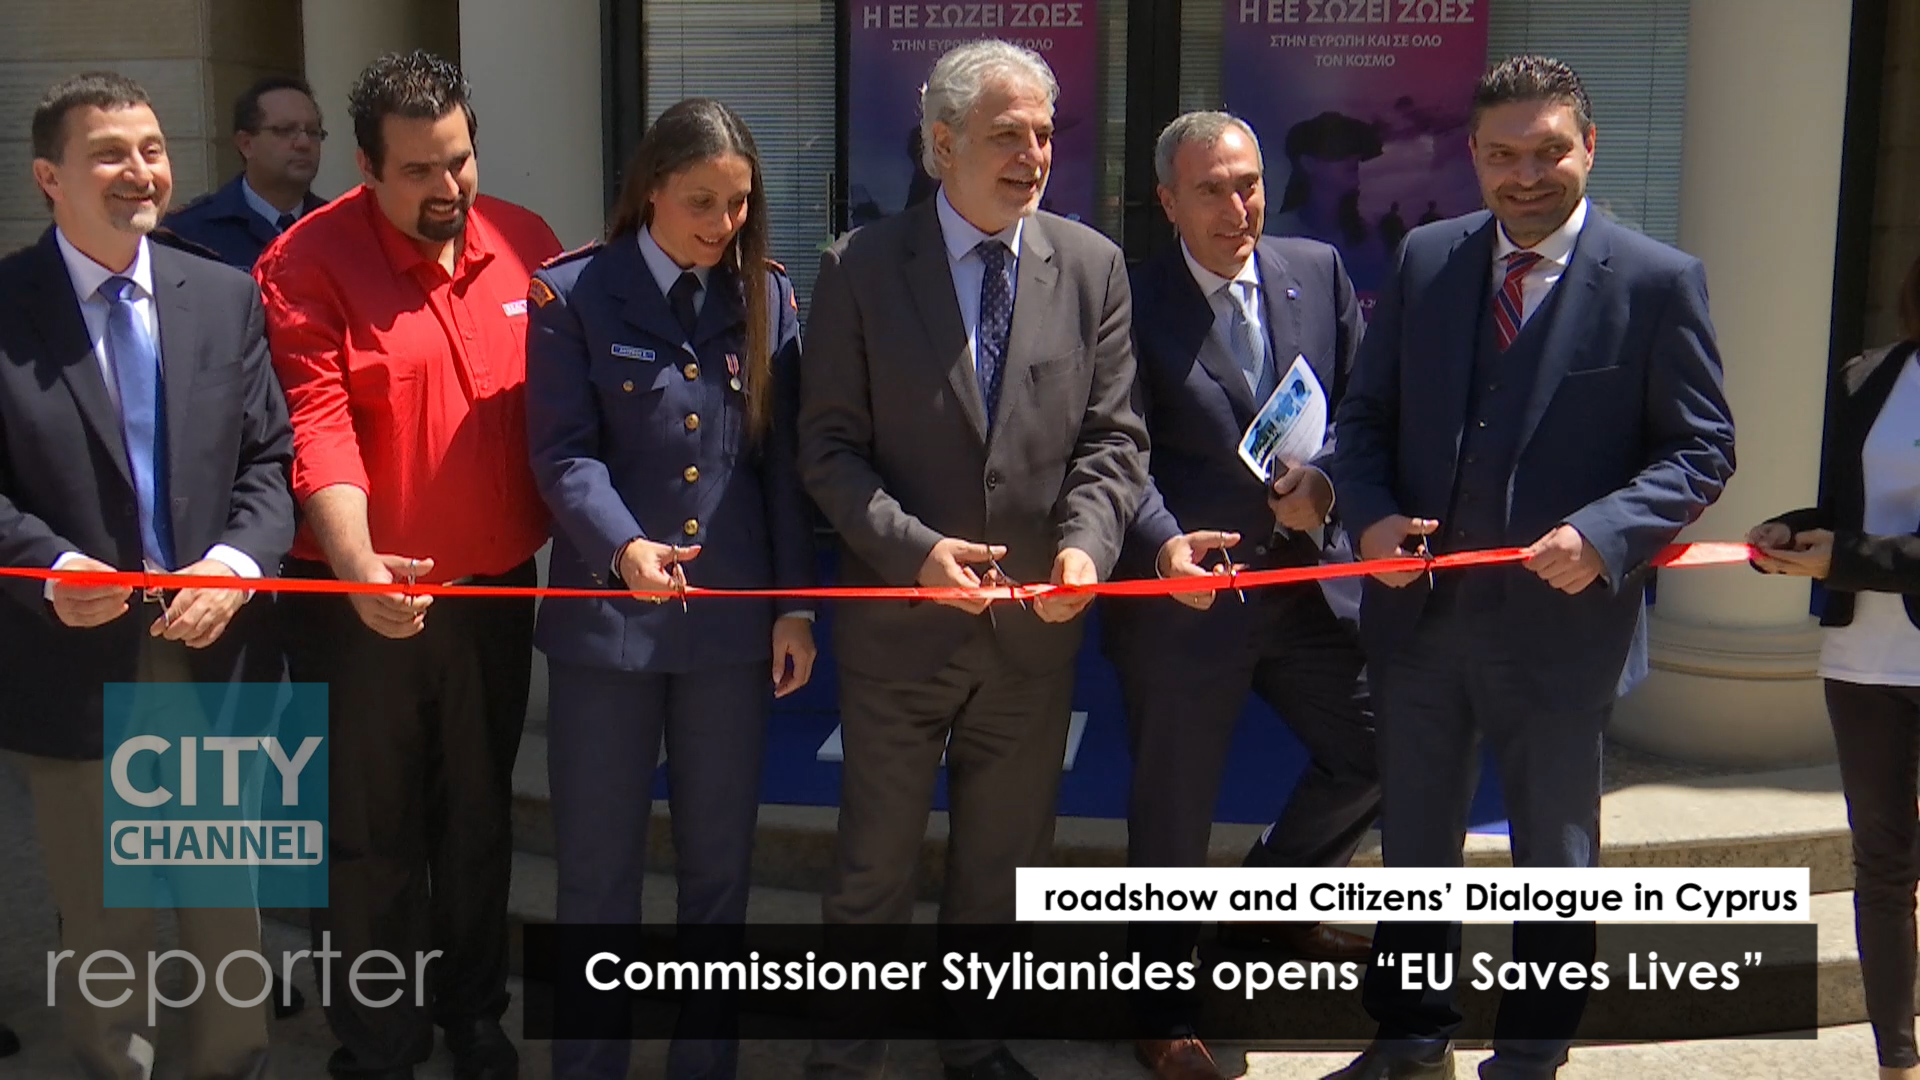 reporter | Commissioner Stylianides opens “EU Saves Lives”